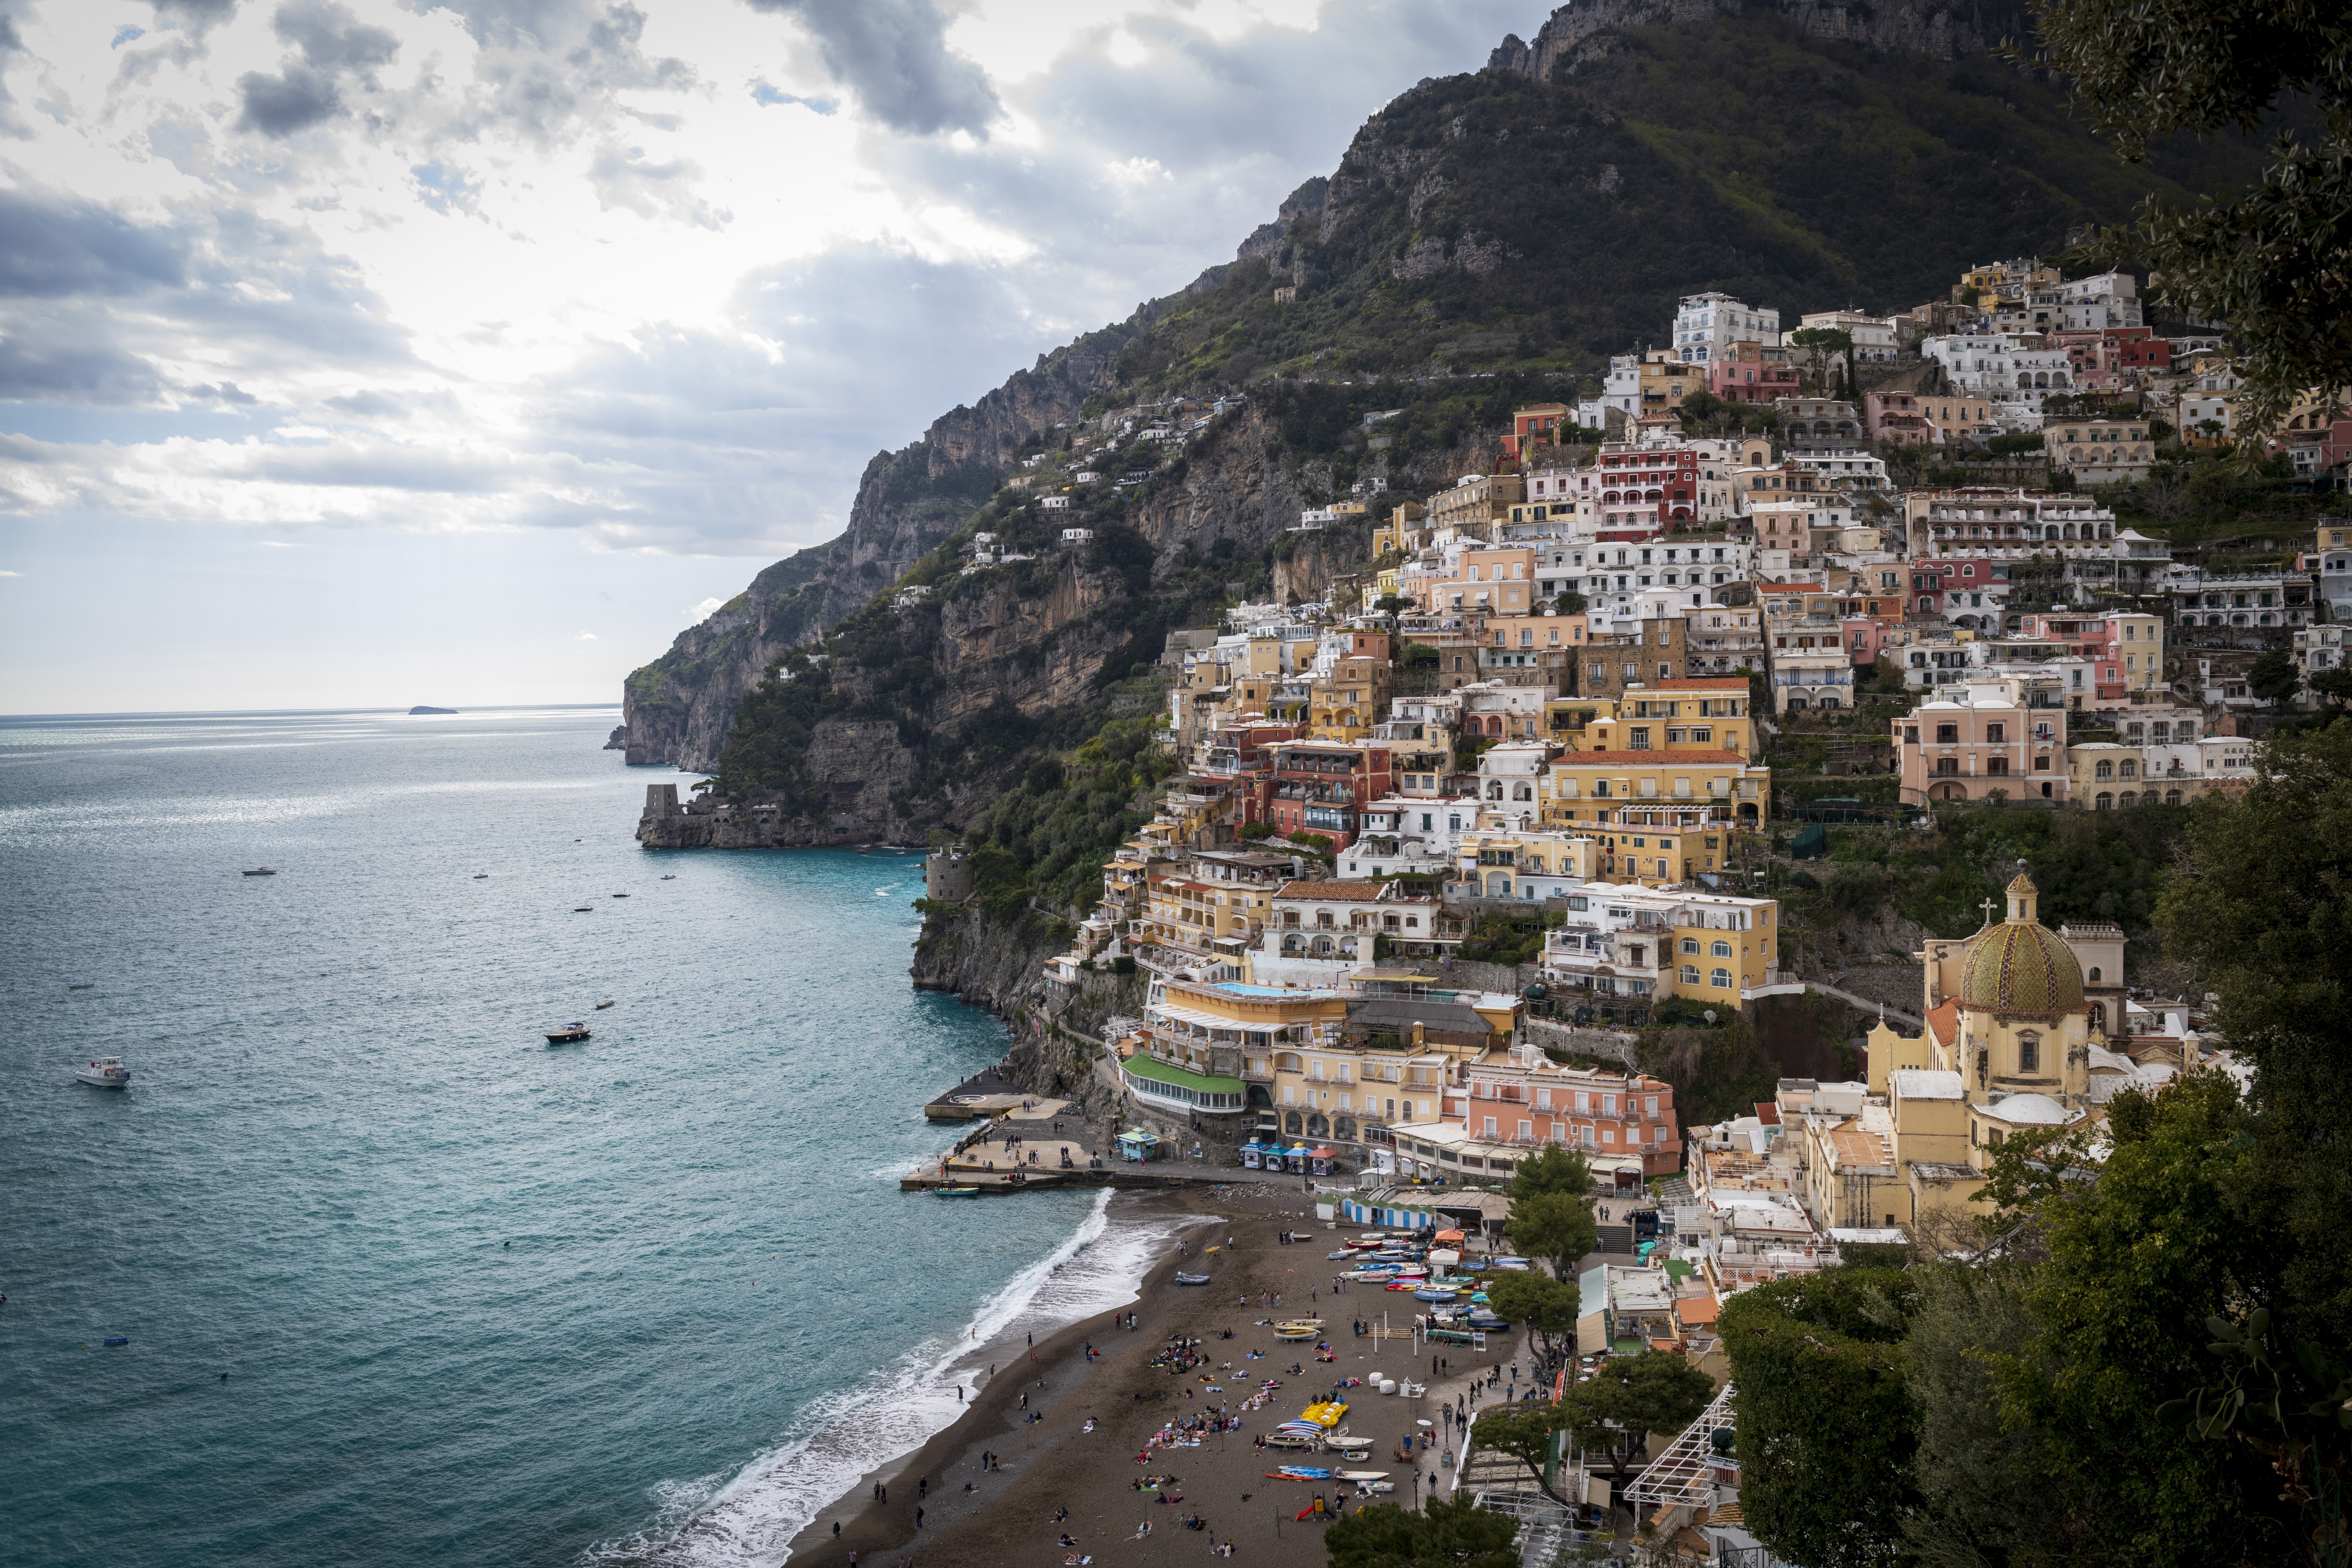 The cliffside village of Positano in Italy